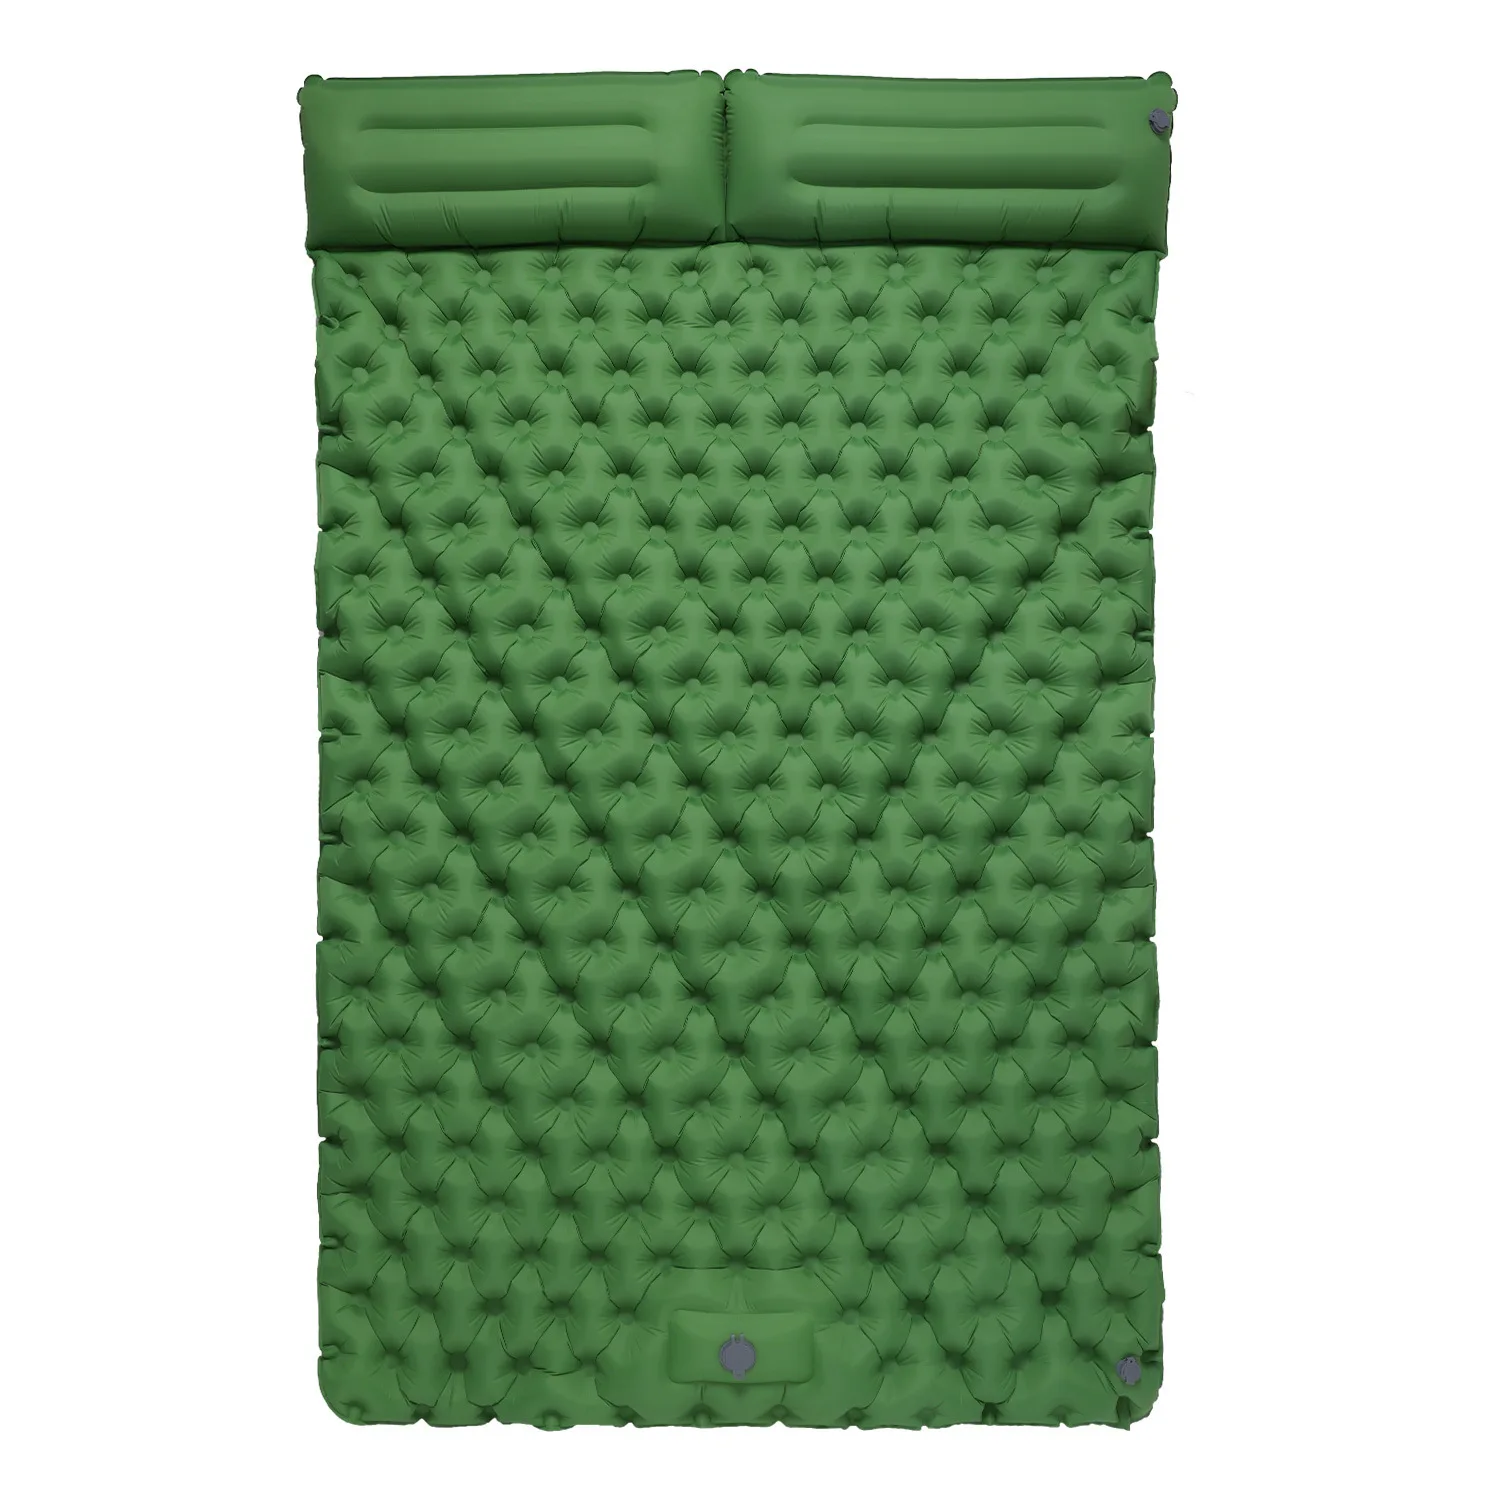 

PACOONE Outdoor Camping Double Inflatable Mattress Extra Wide Sleeping Pad Ultralight Folding Bed Sleeping Mat Car Travel Mat